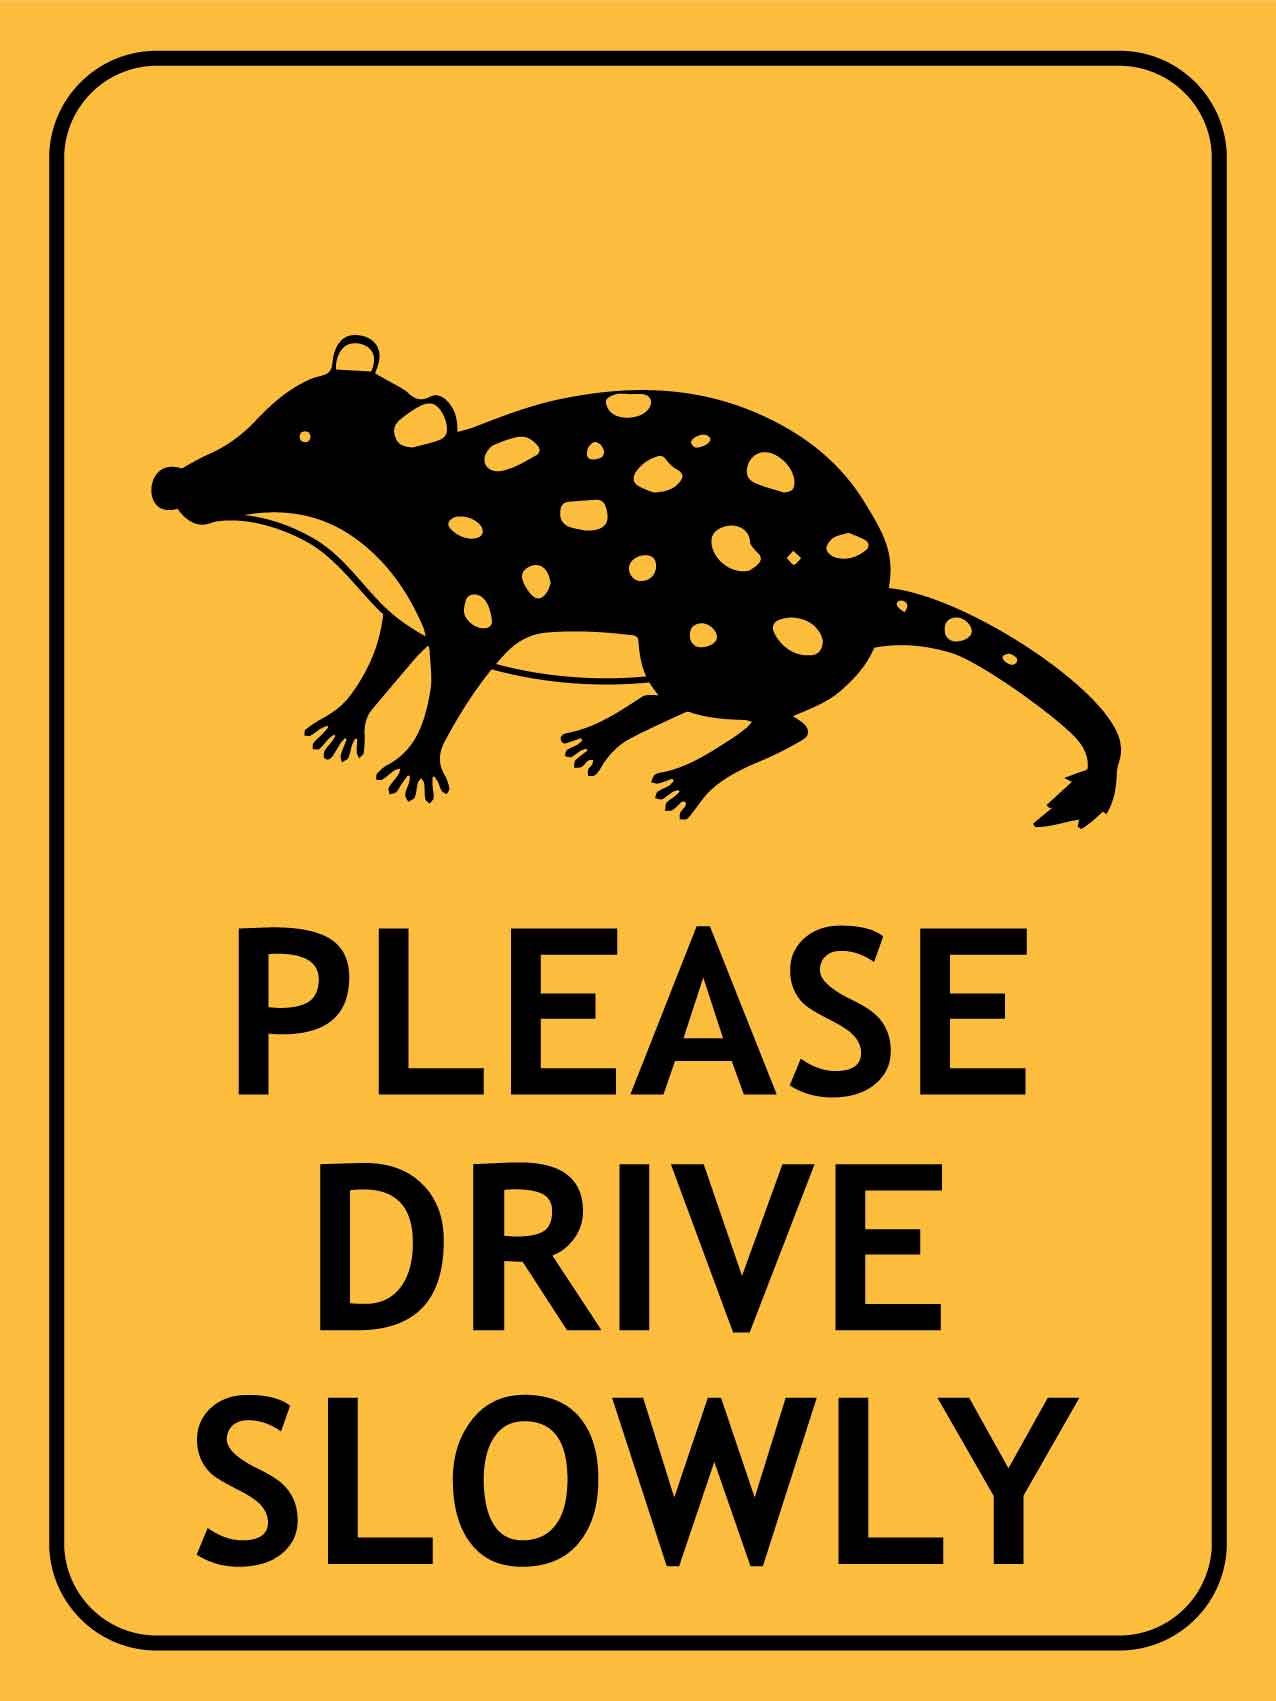 Quoll Spotted Please Drive Slowly Sign